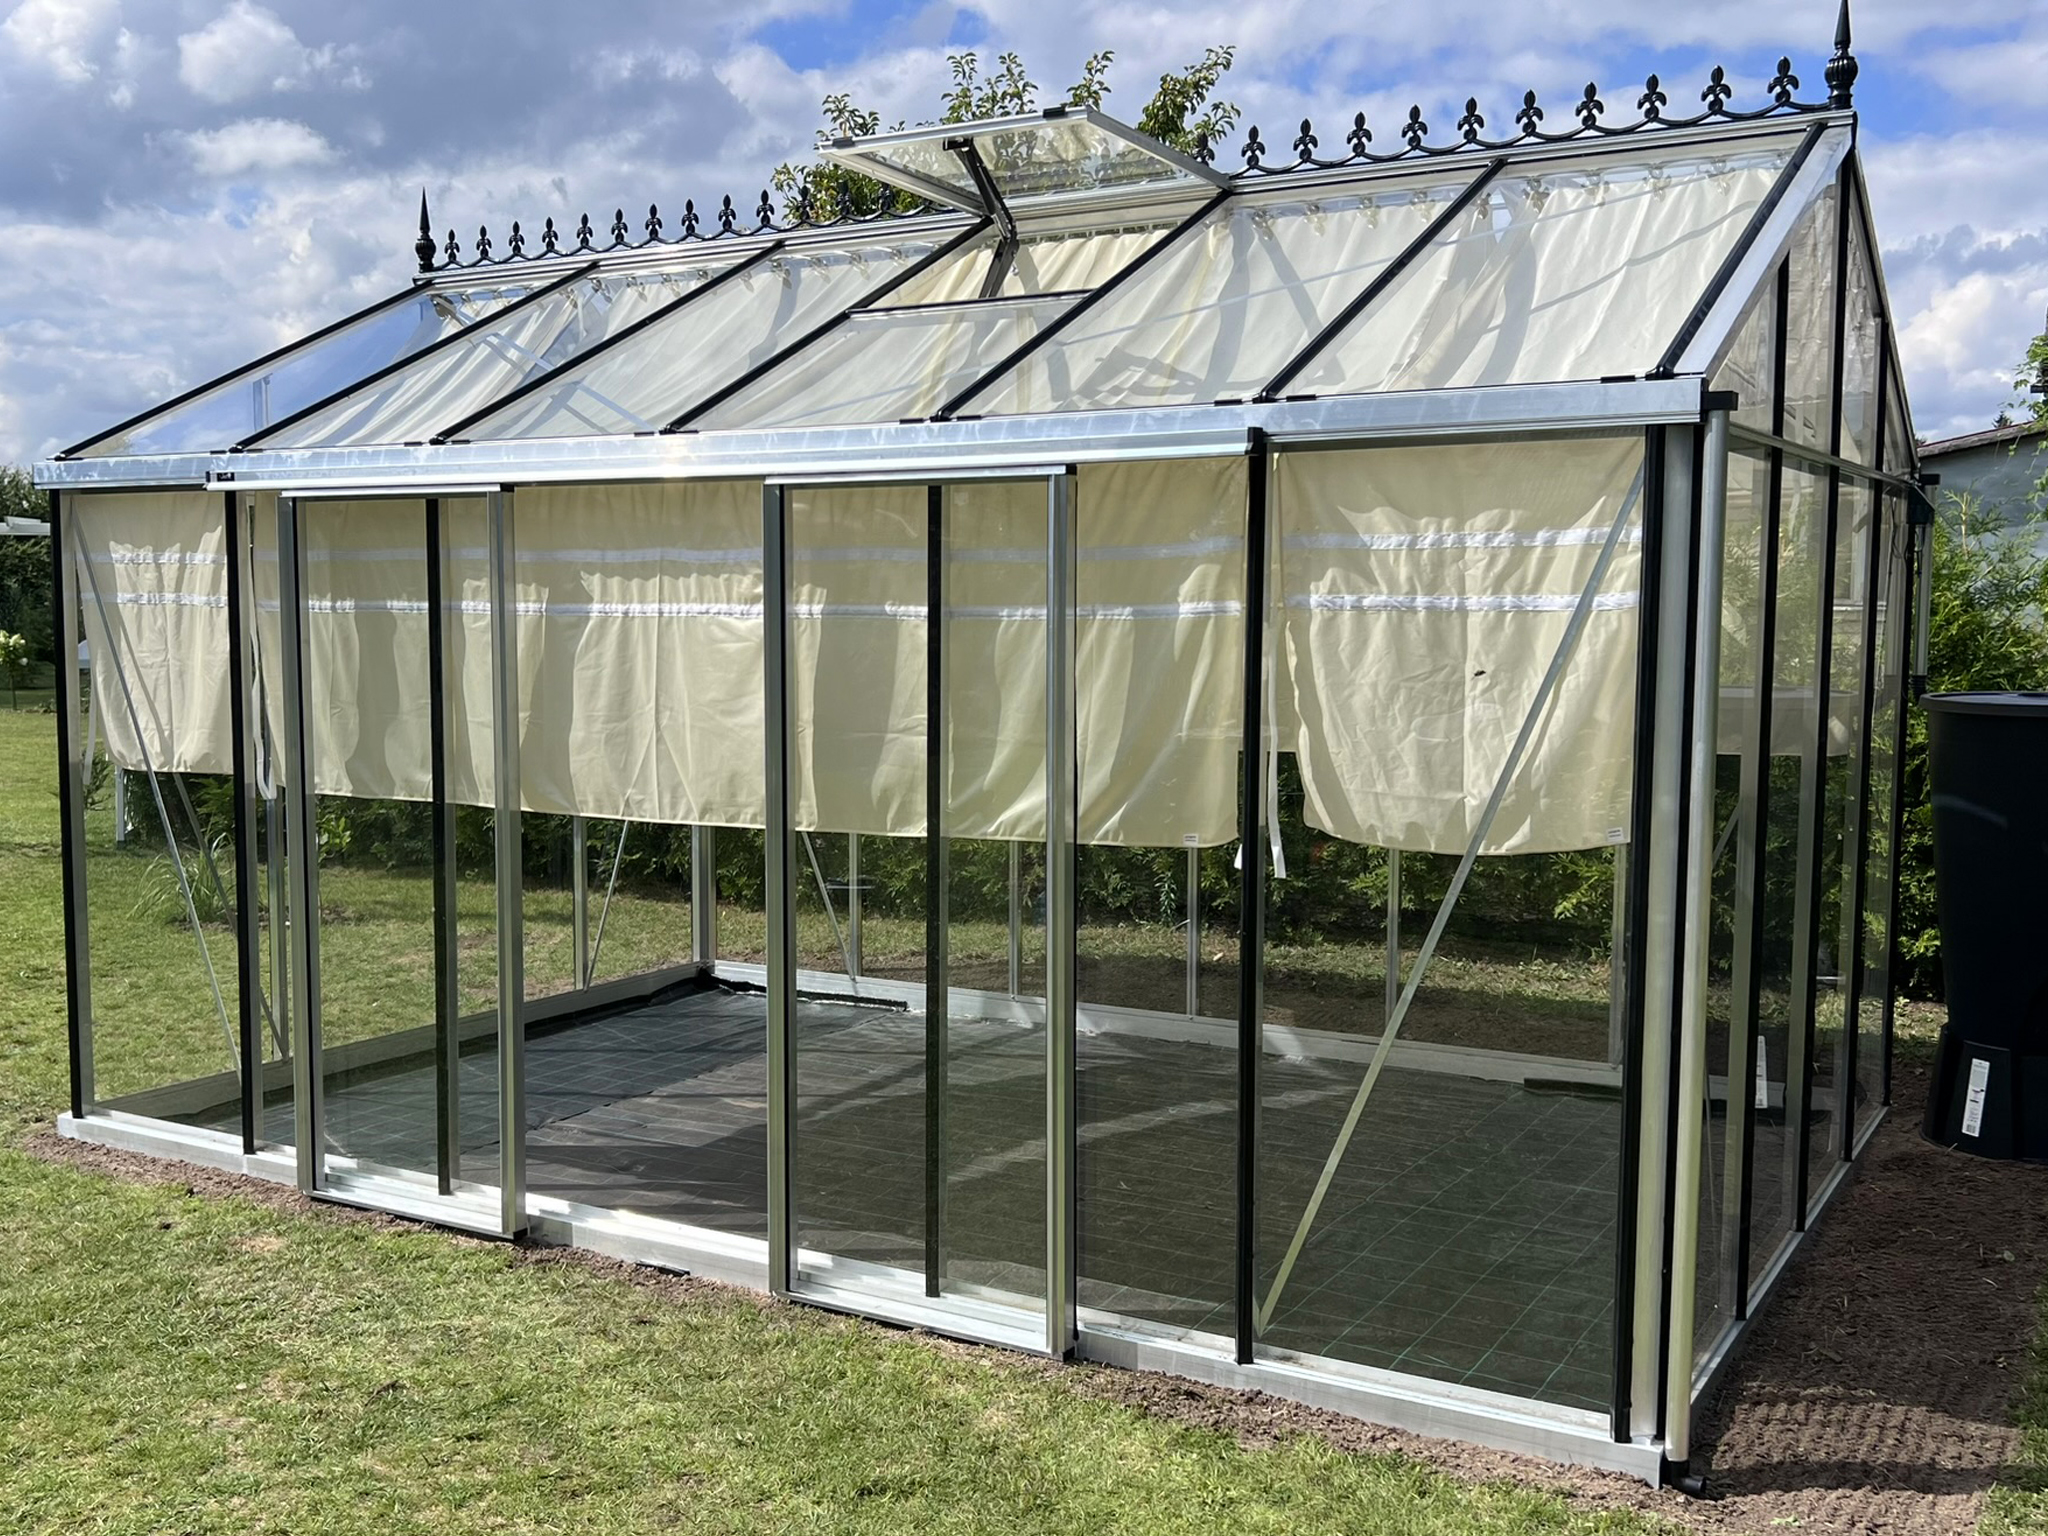 Janssens MASTER greenhouse with shading curtains, rainwater barrel and solar irrigation system.